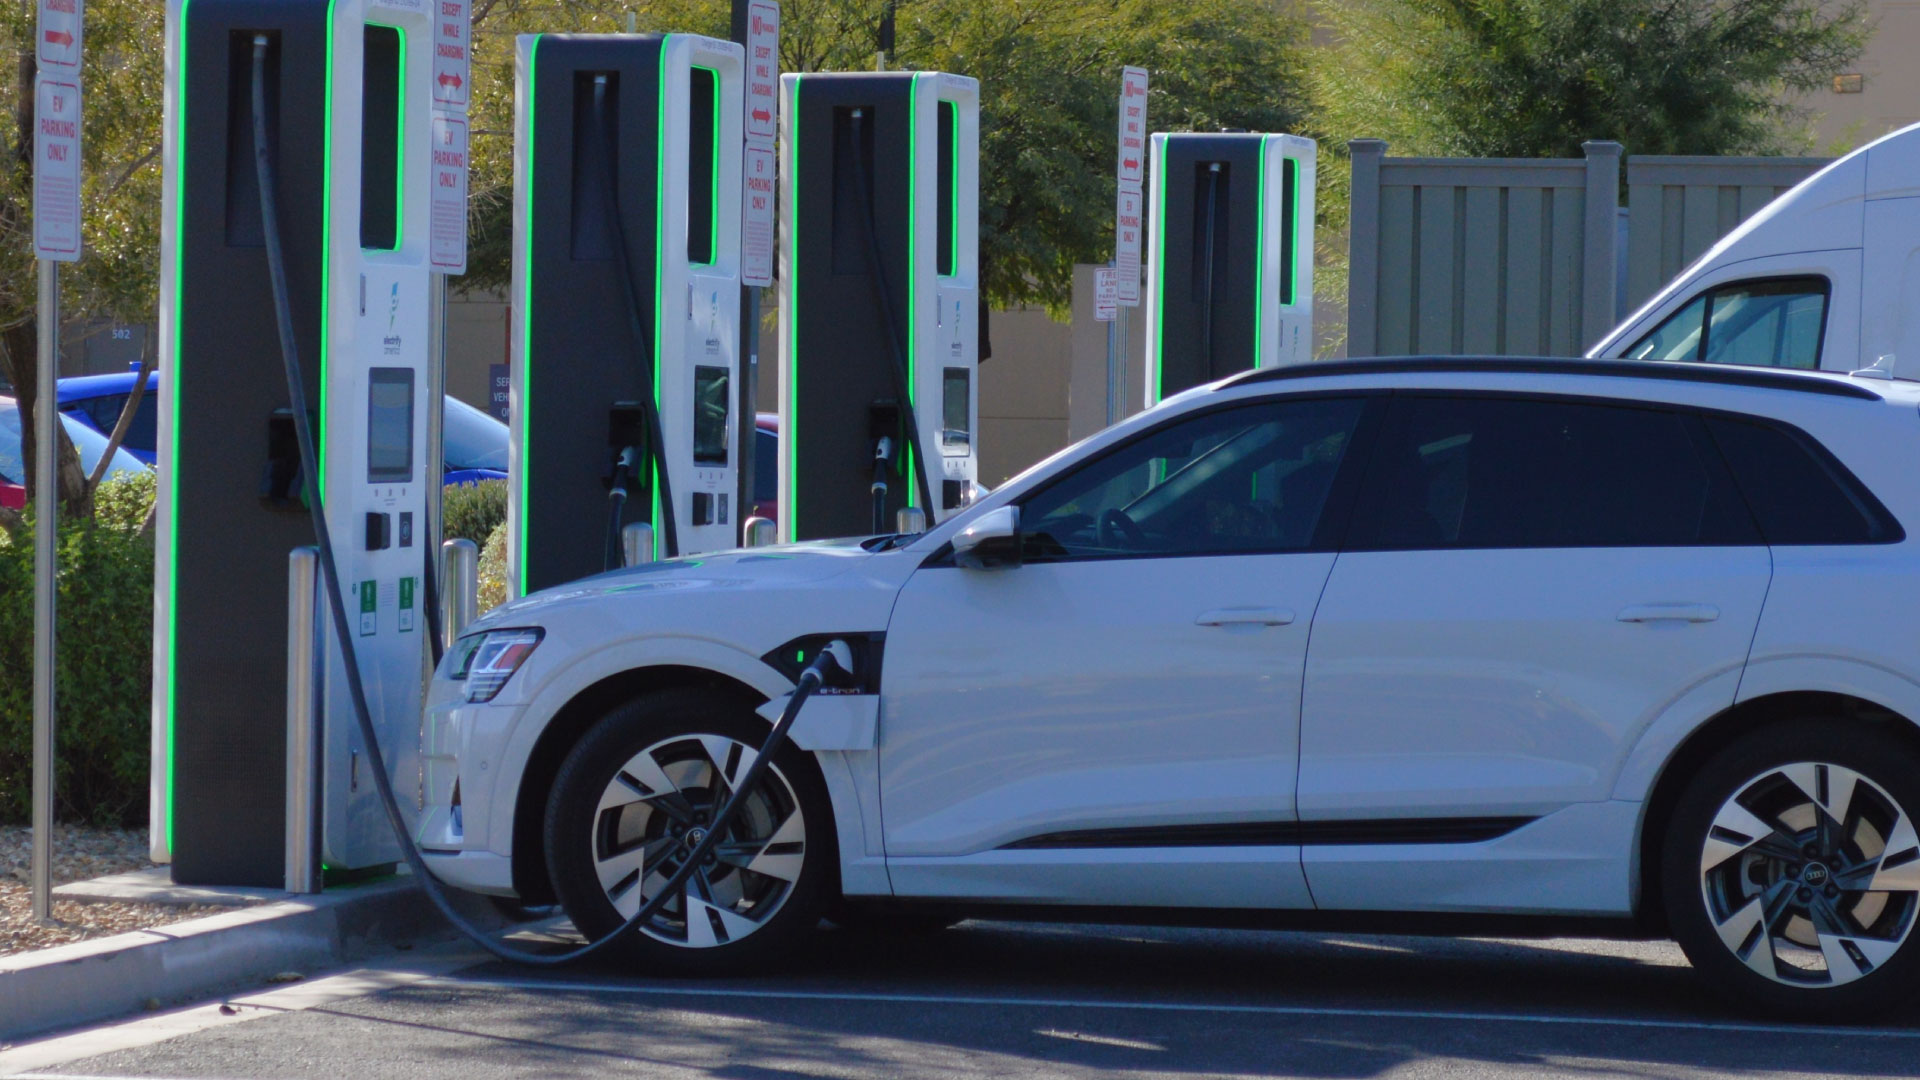 An EV car plugged into a charging station with batter statistics being shown